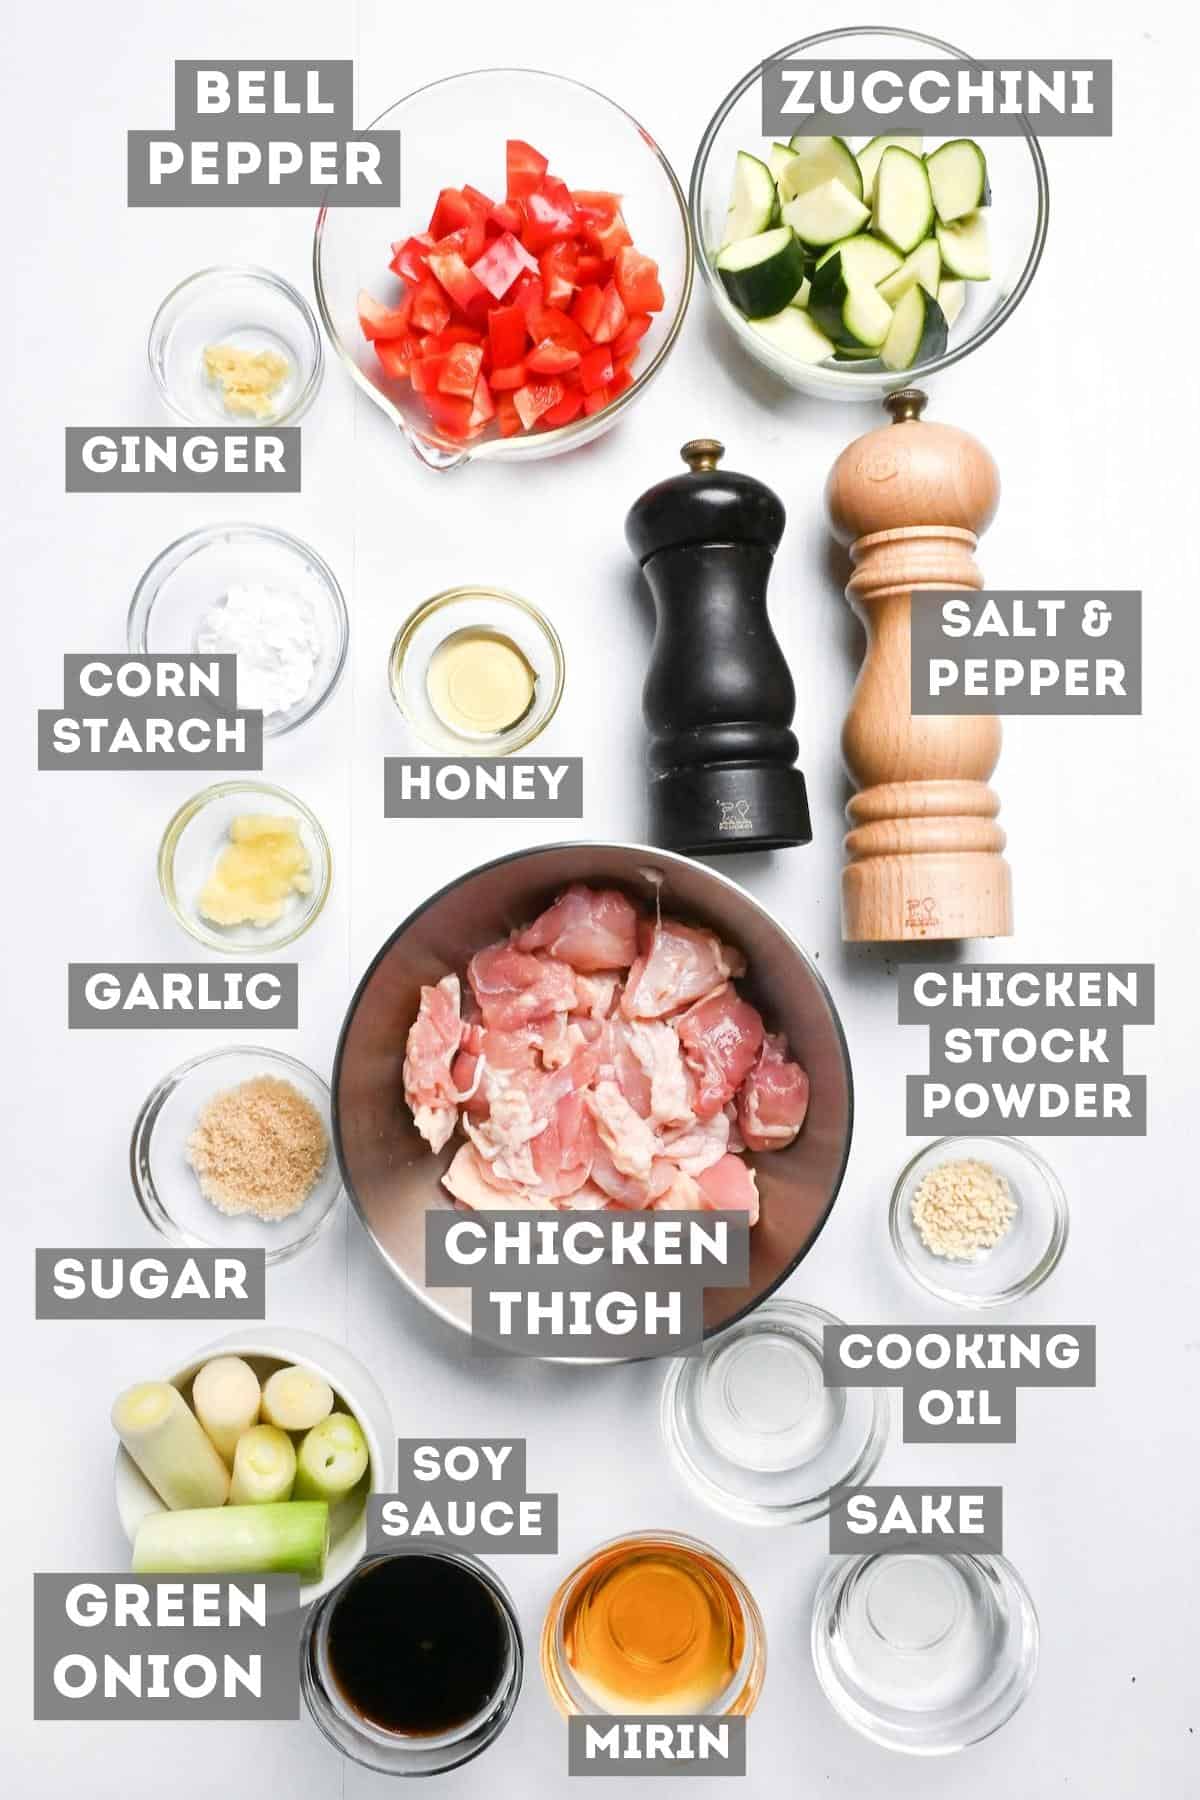 yakitori donburi ingredients on a white background with labels